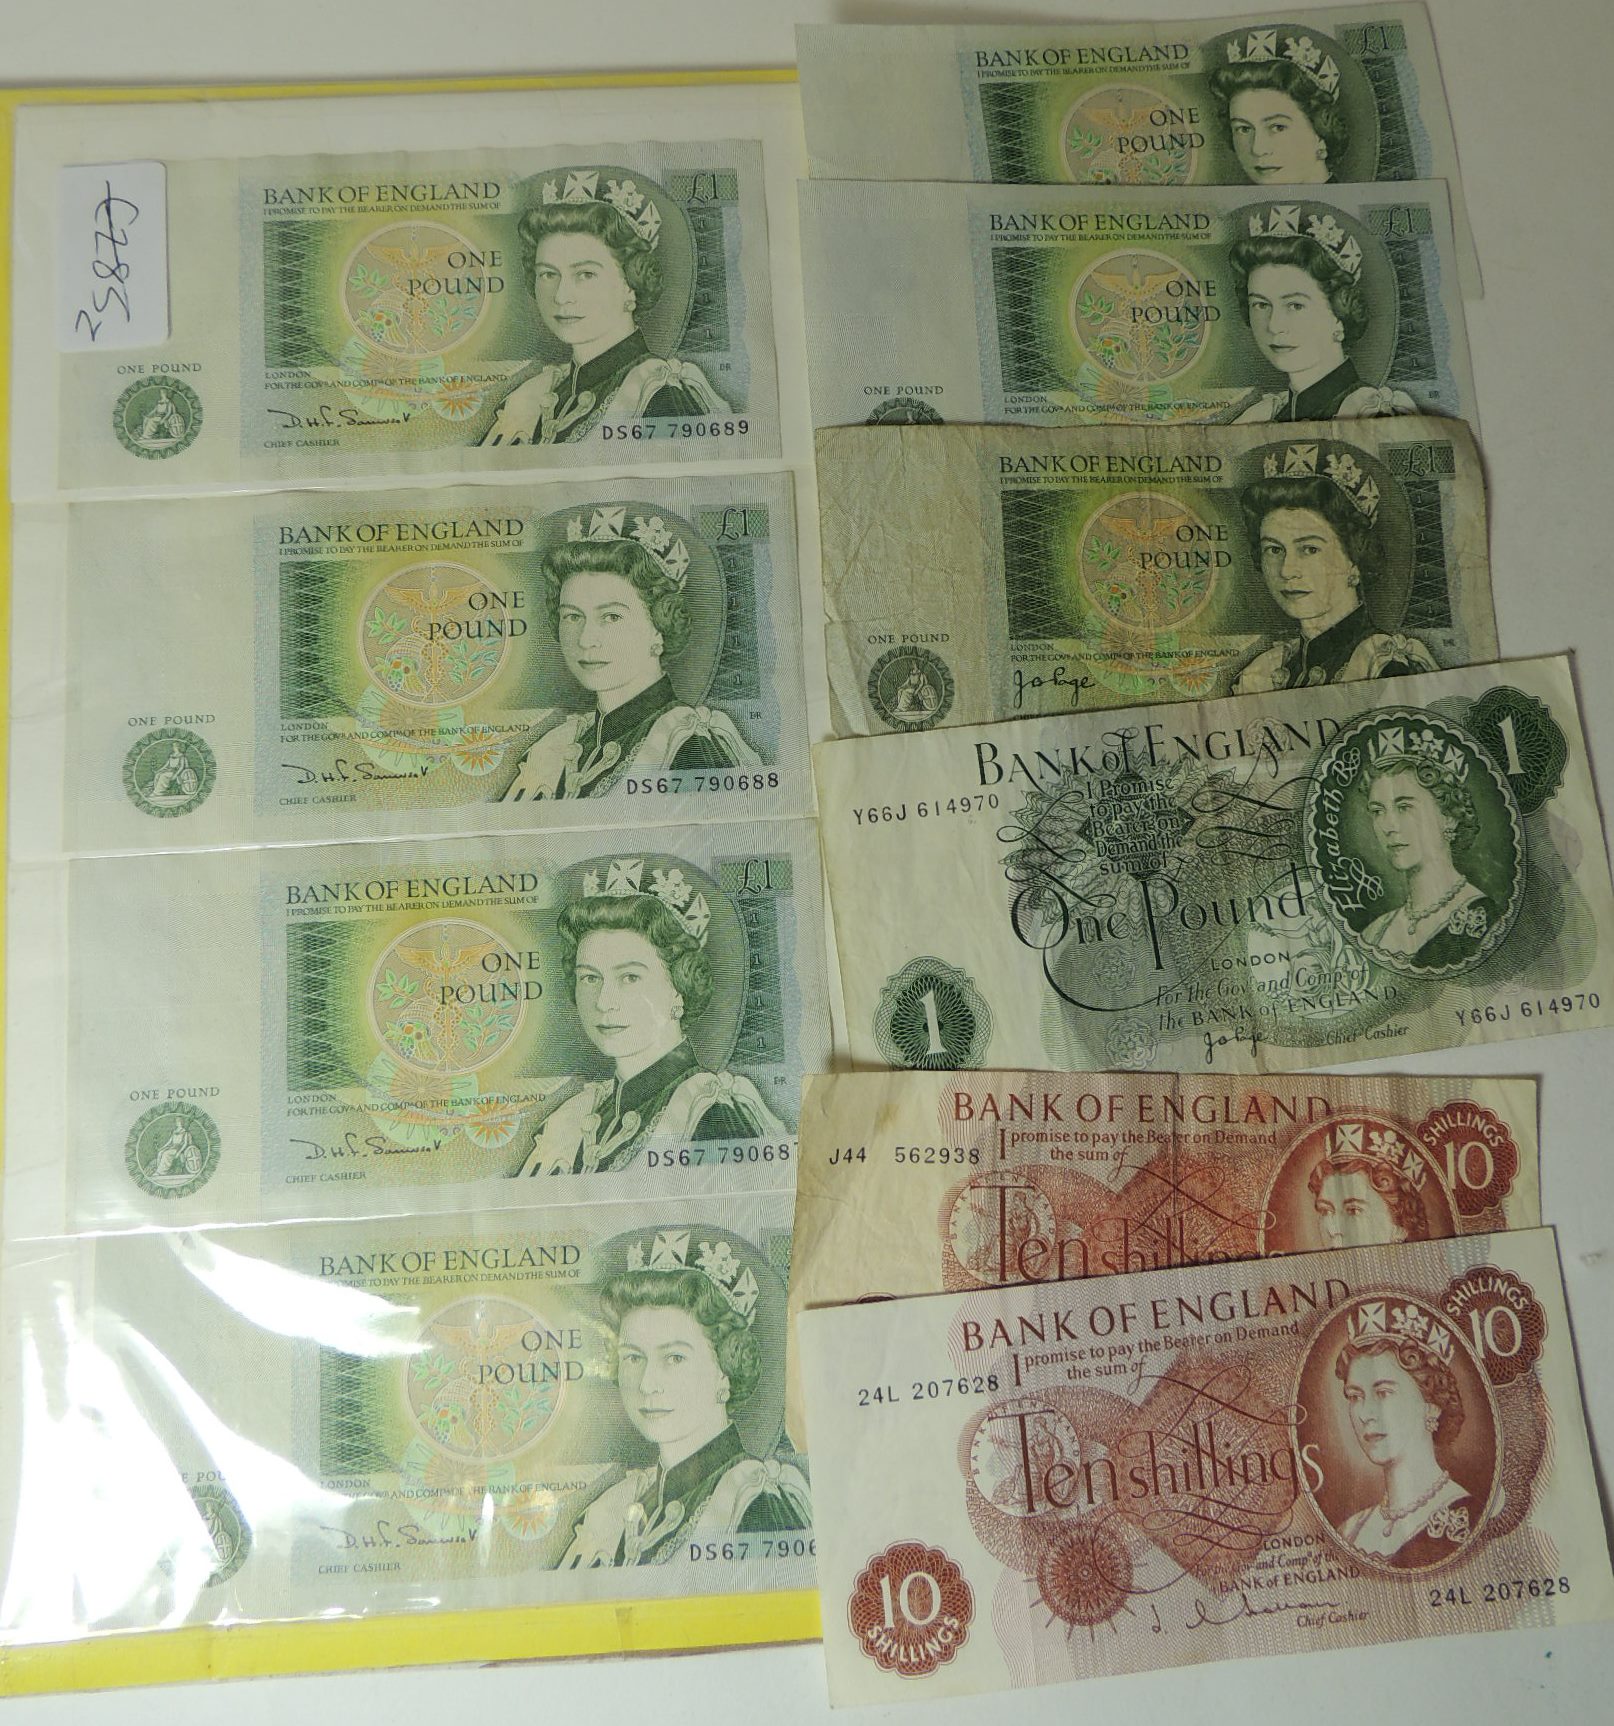 BANK OF ENGLAND - £1 notes: consecutive signed Somerset DS67 790686 - 689; two other signed